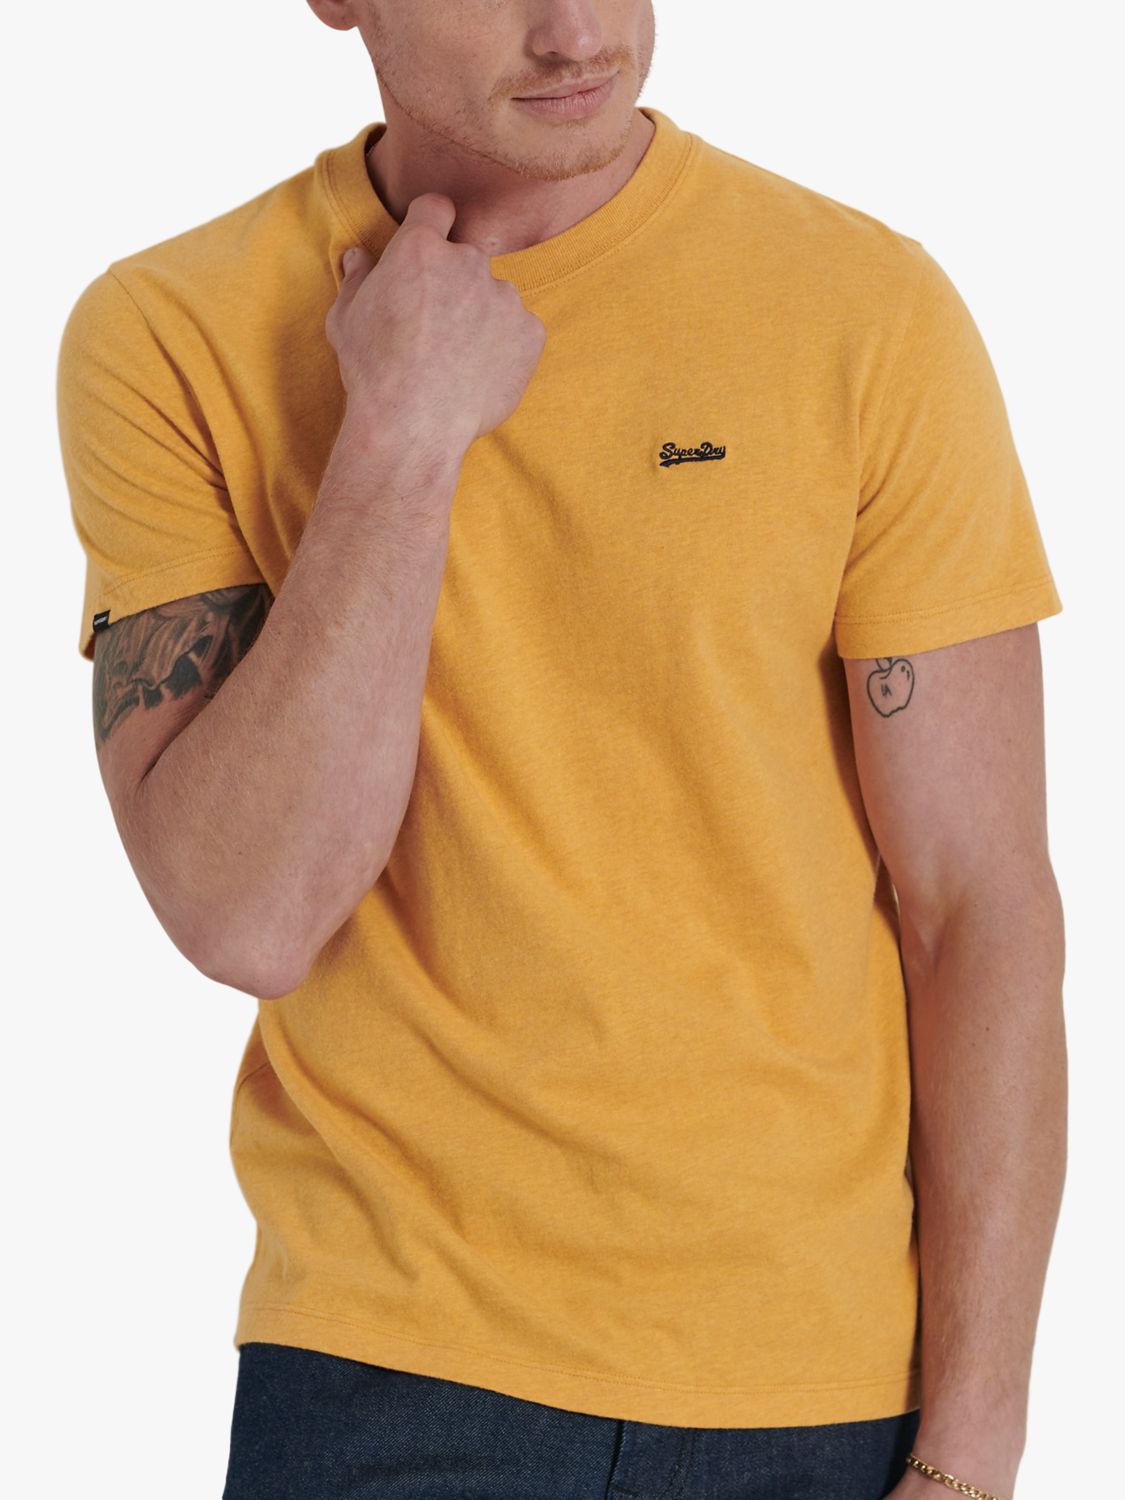 Superdry Organic Cotton Vintage Embroidered T-Shirt